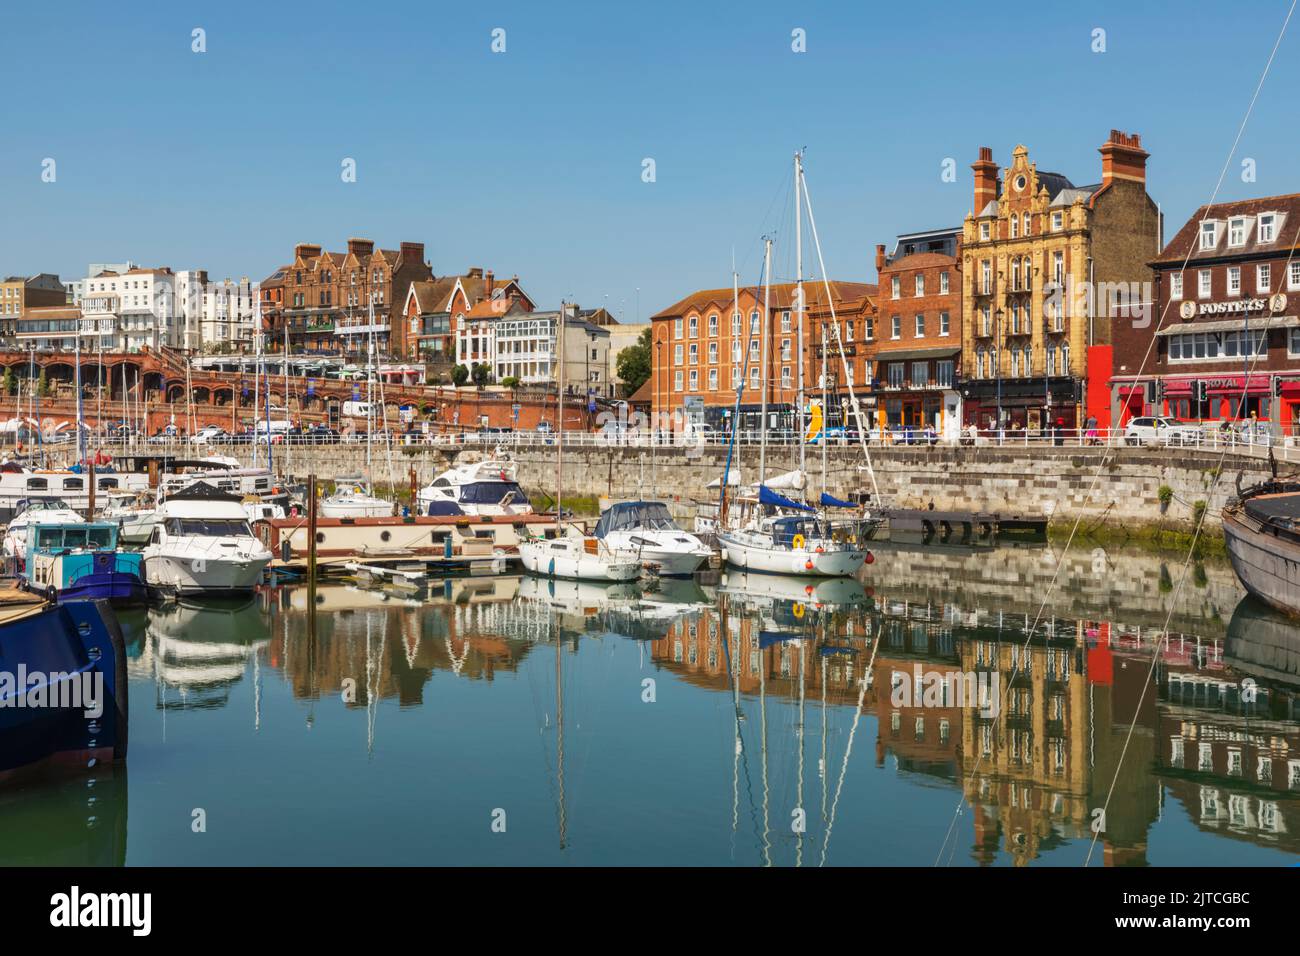 England, Kent, Ramsgate, Ramsgate Yacht Marina and Town Skyline, Reflection of Yachts in the Water Stock Photo